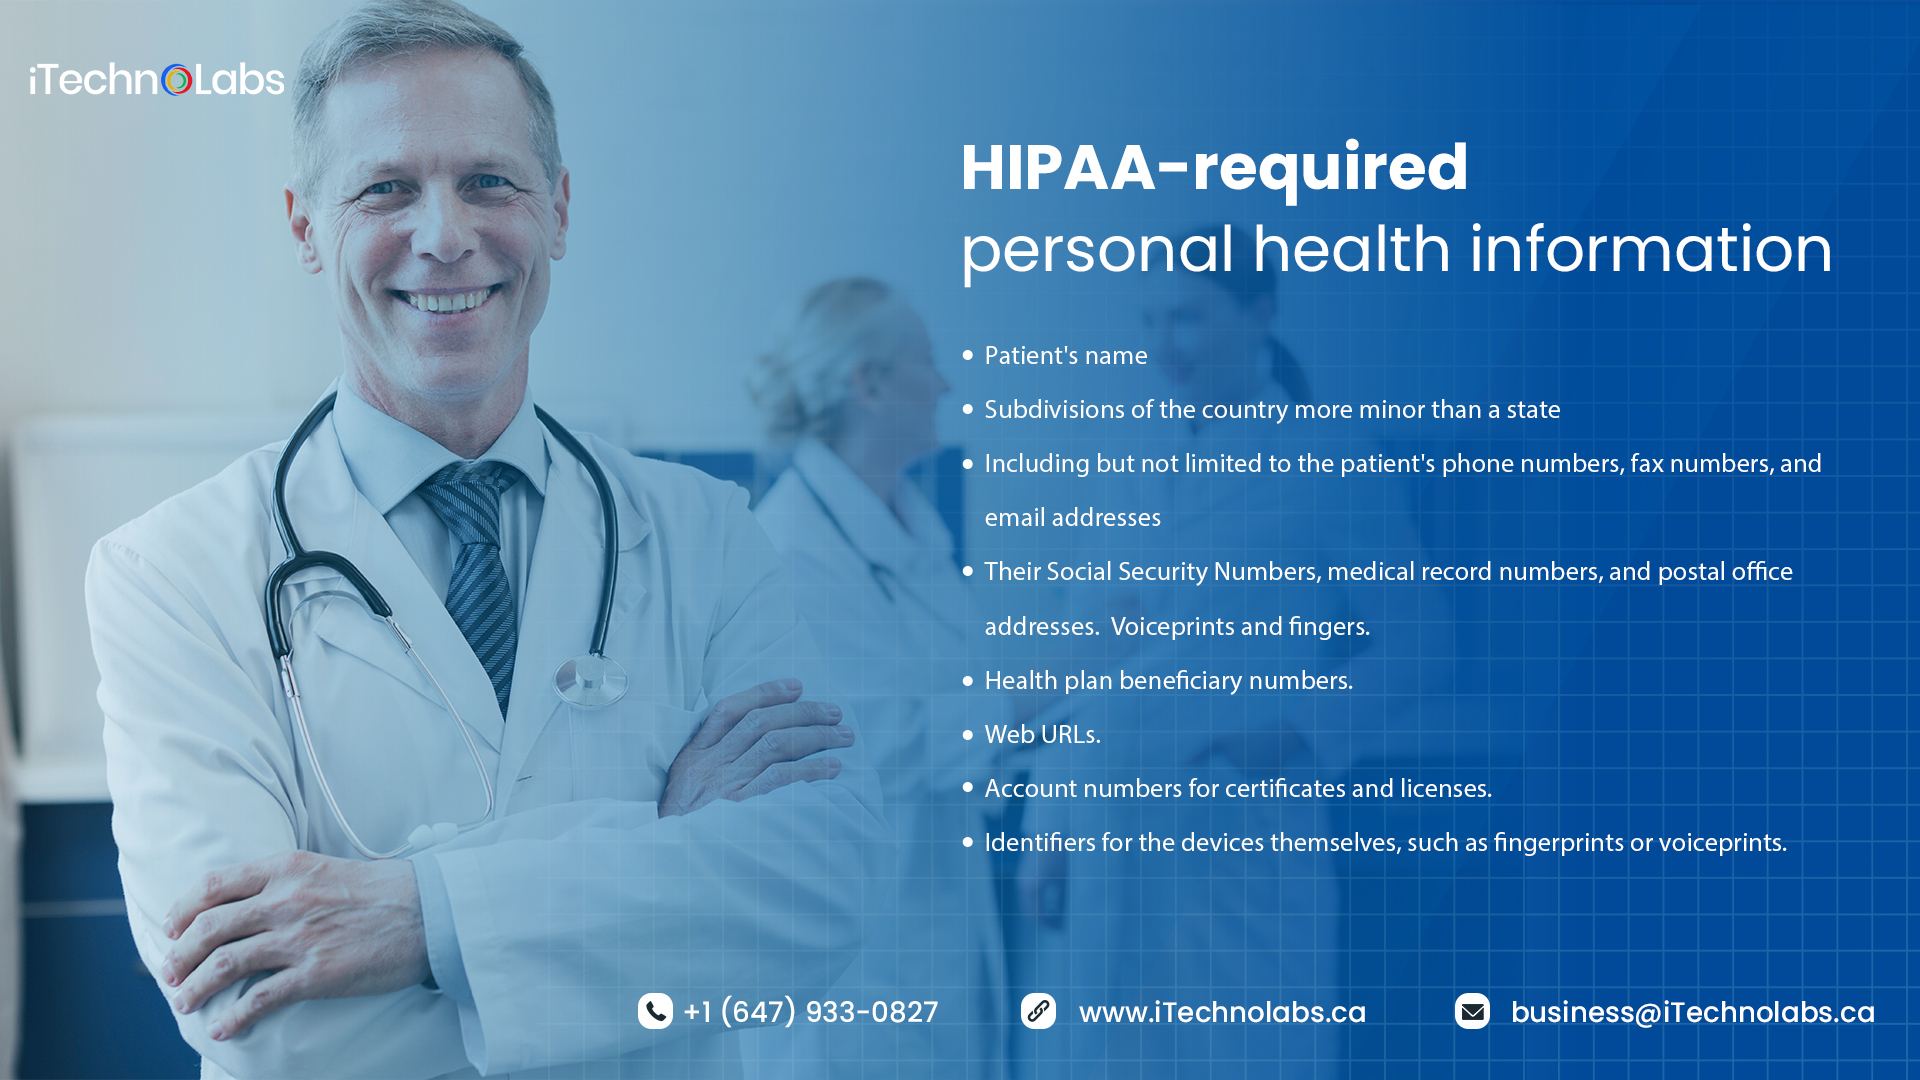 hipaa-required personal health information itechnolabs